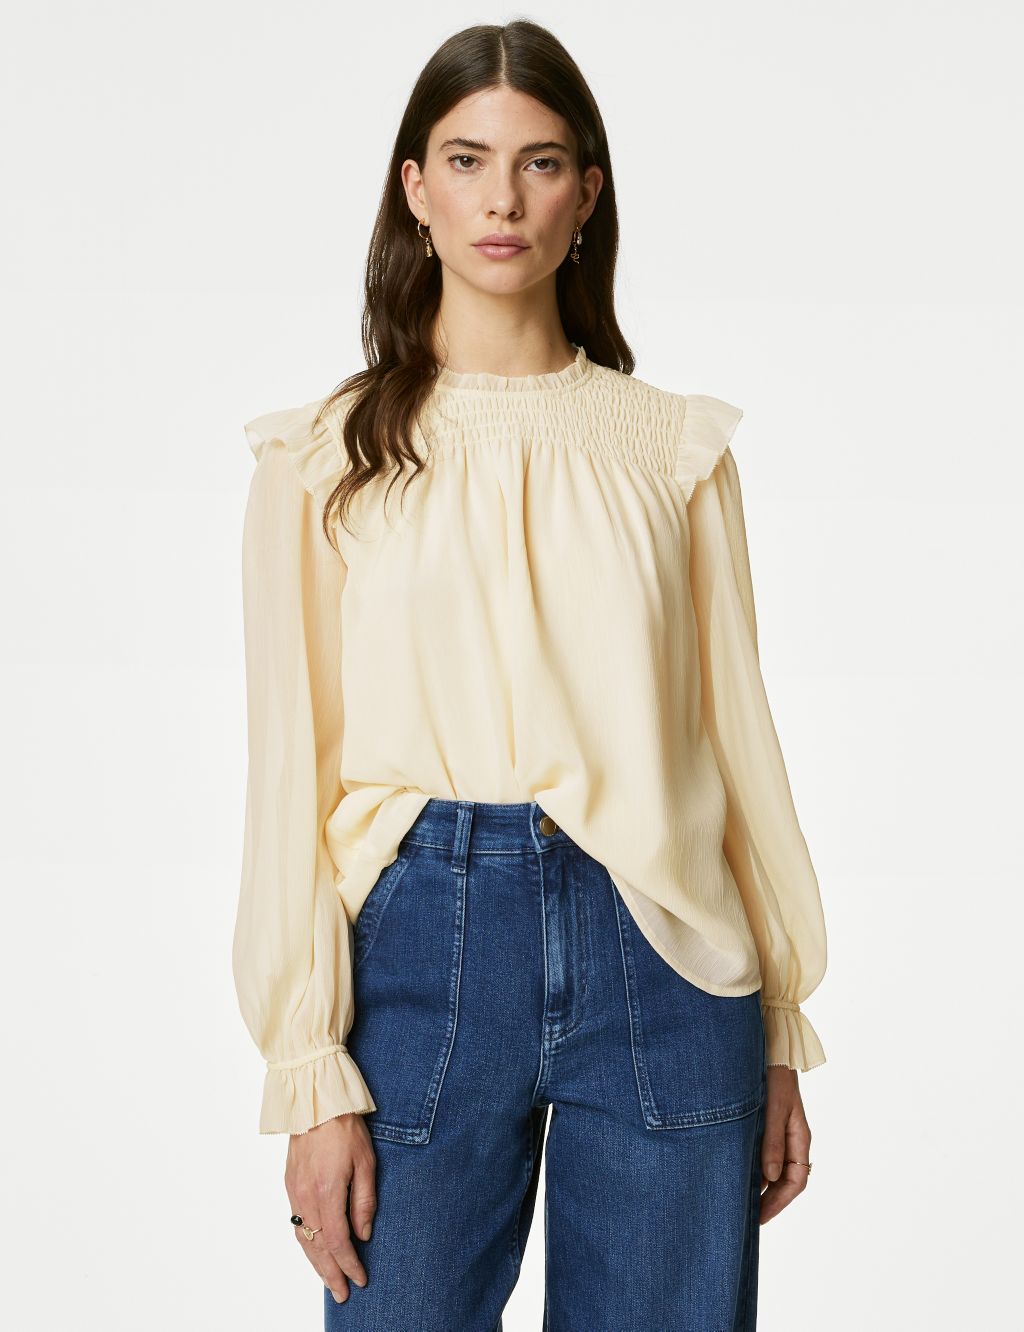 Shirred High Neck Frill Detail Blouse image 1